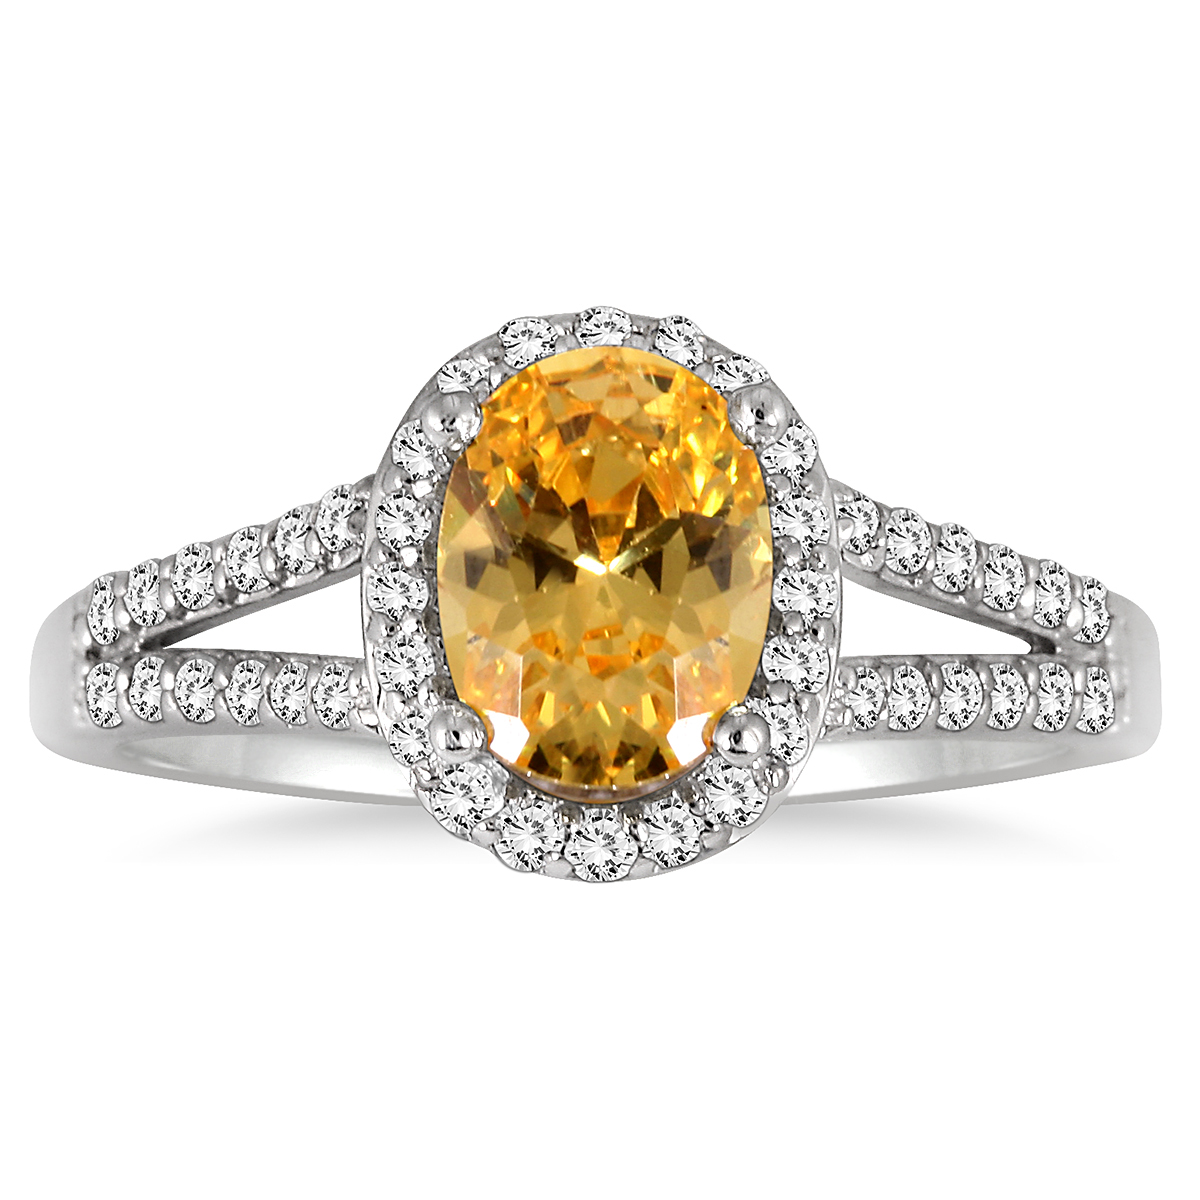 1 1/4 Carat Oval Citrine and Diamond Ring in 10K White Gold